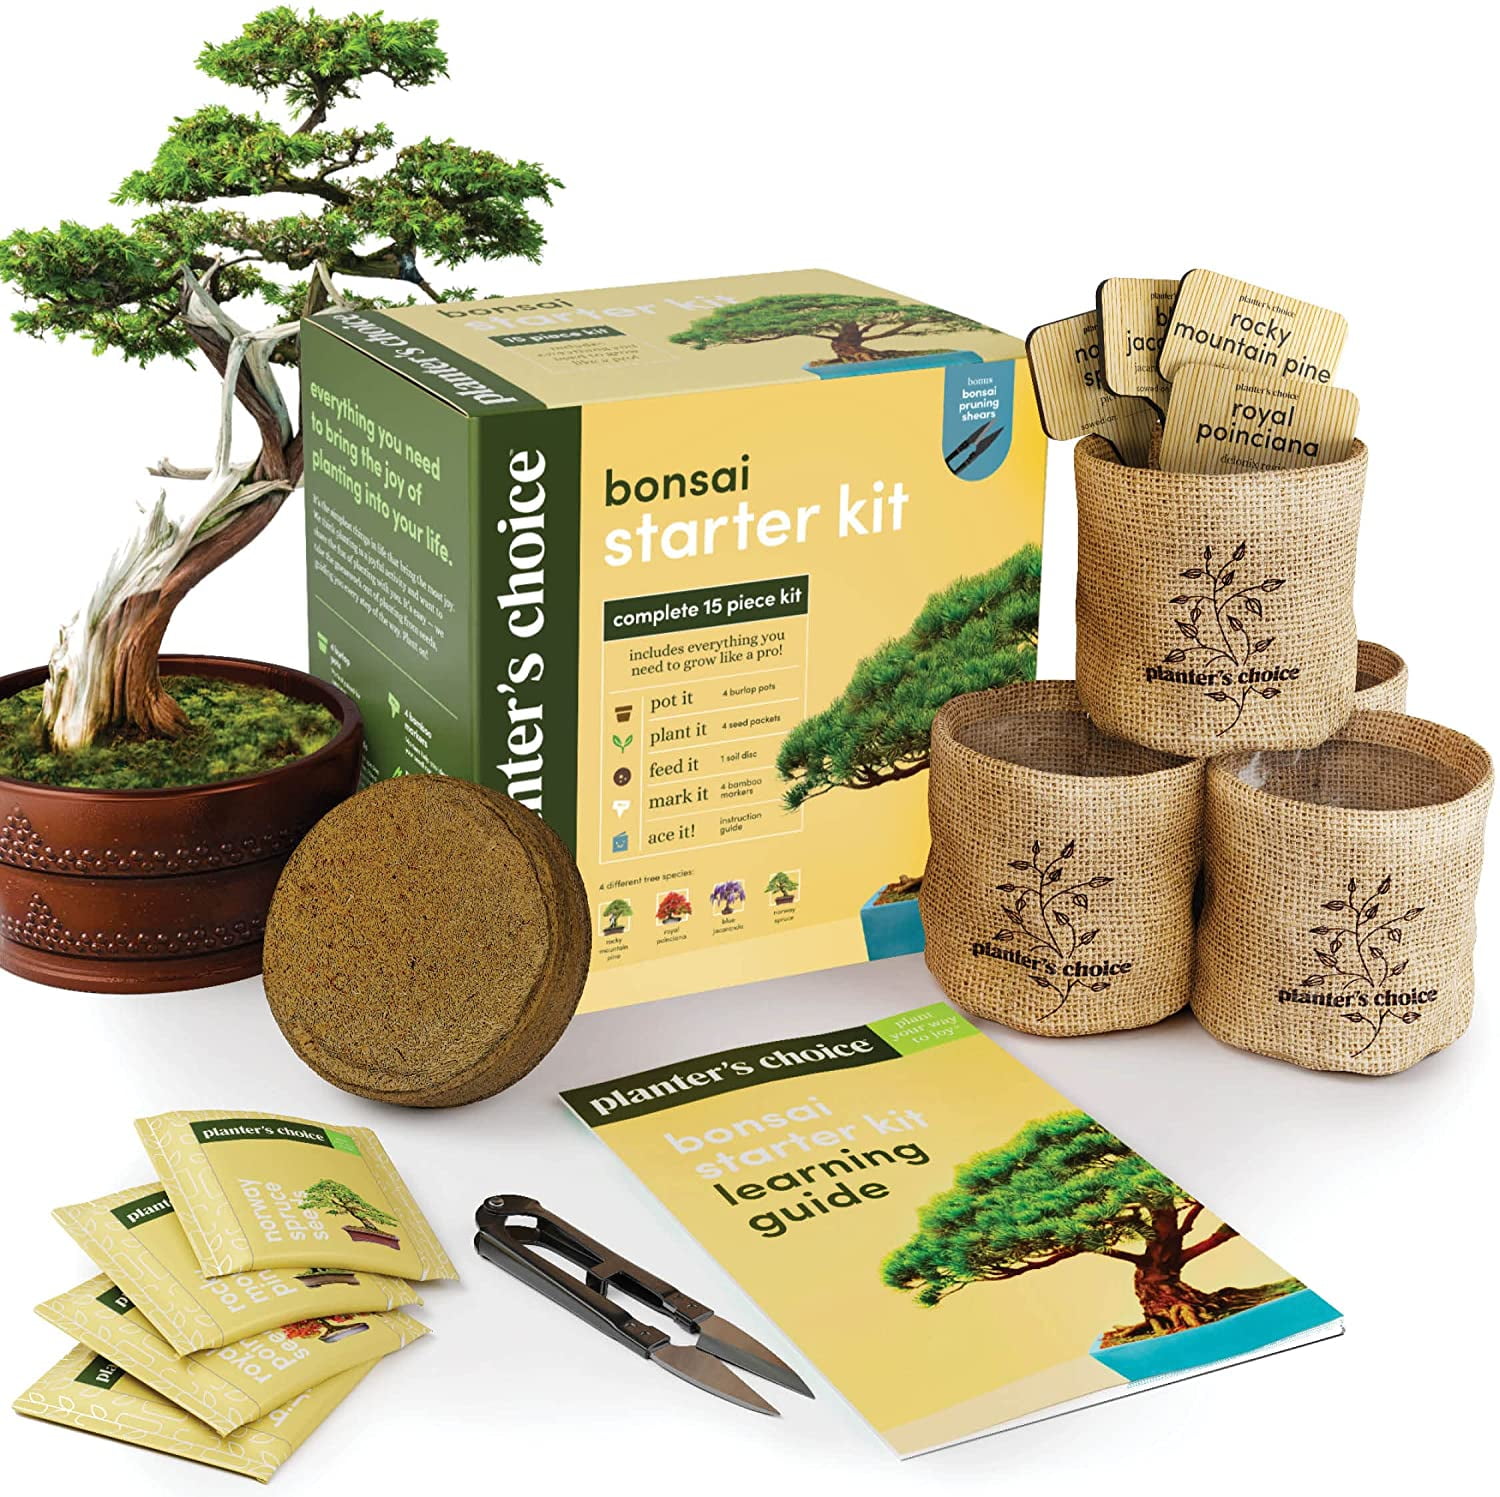 Bonsai Starter Kit - Gardening Gifts for Women & Men - Unique DIY Hobbies,  Crafts Hobby Kits for Adults - Unusual Christmas Gift Ideas for Garden  Plant Lovers, or Gardener Mother 